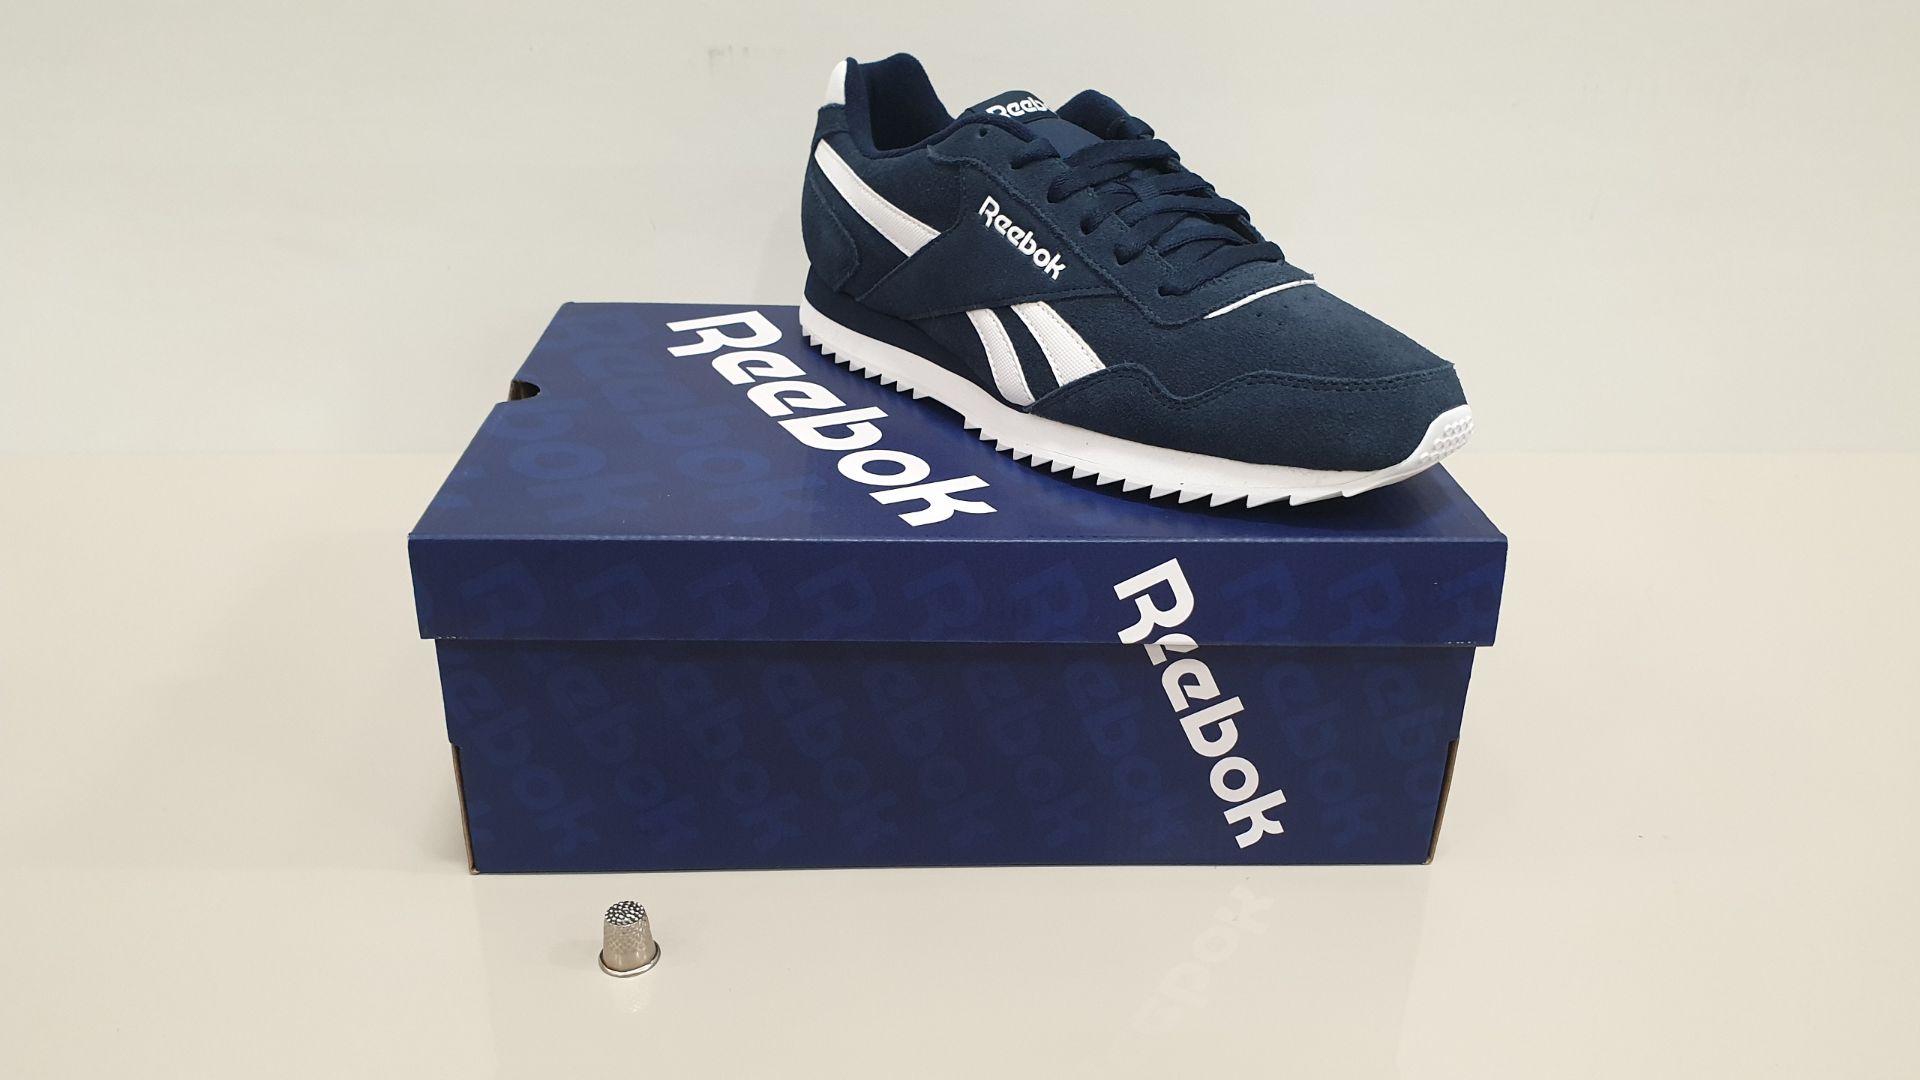 6 X REEBOK ROYAL GLIDE RUNNING TRAINERS BLUE WITH WHITE STRIPE SIZE 11 - BRAND NEW AND BOXED